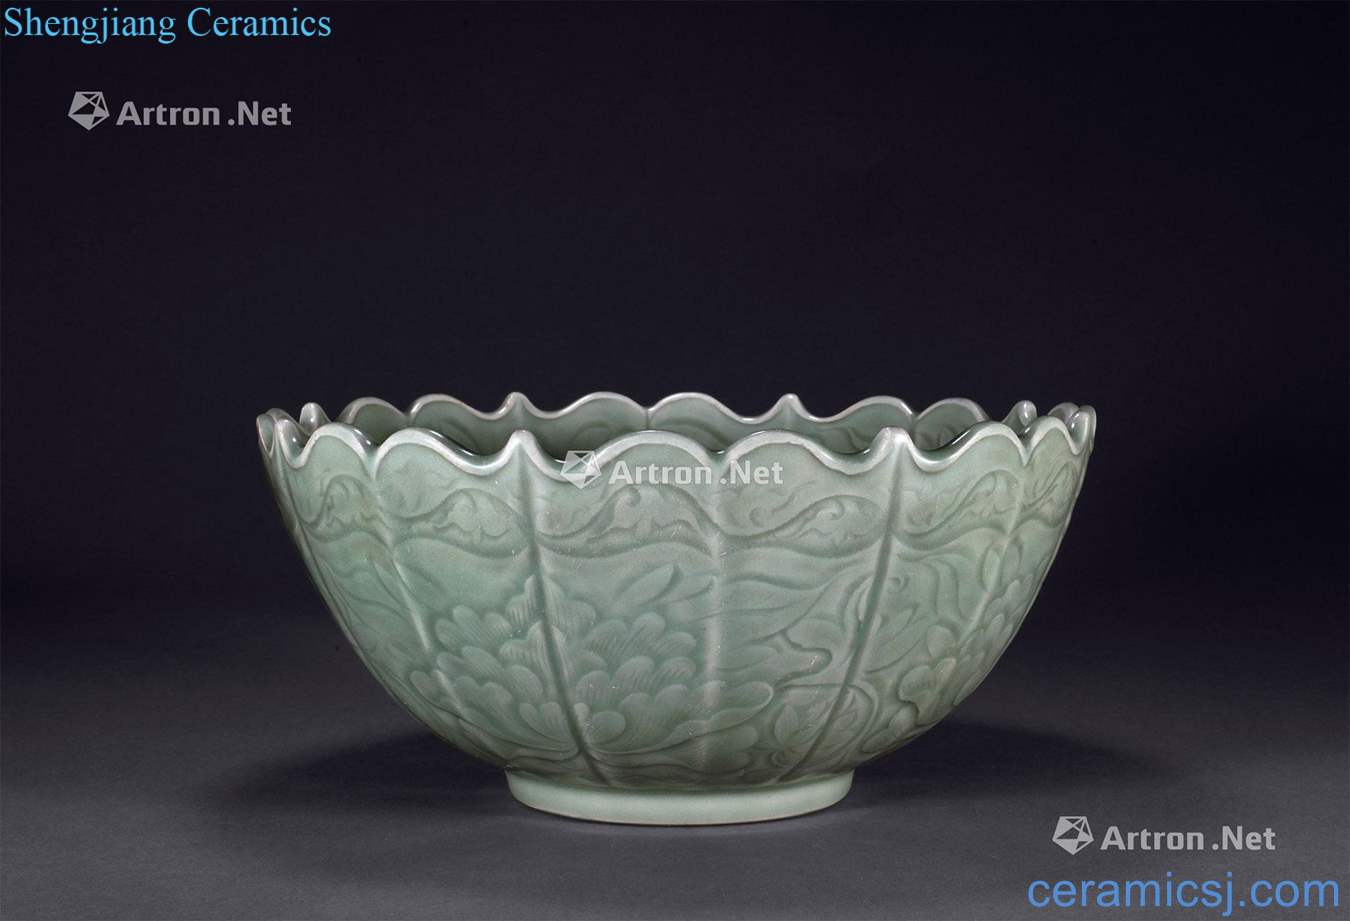 At the end of the yuan Ming Longquan celadon green glazed carved flowers around branches grain flower bowls